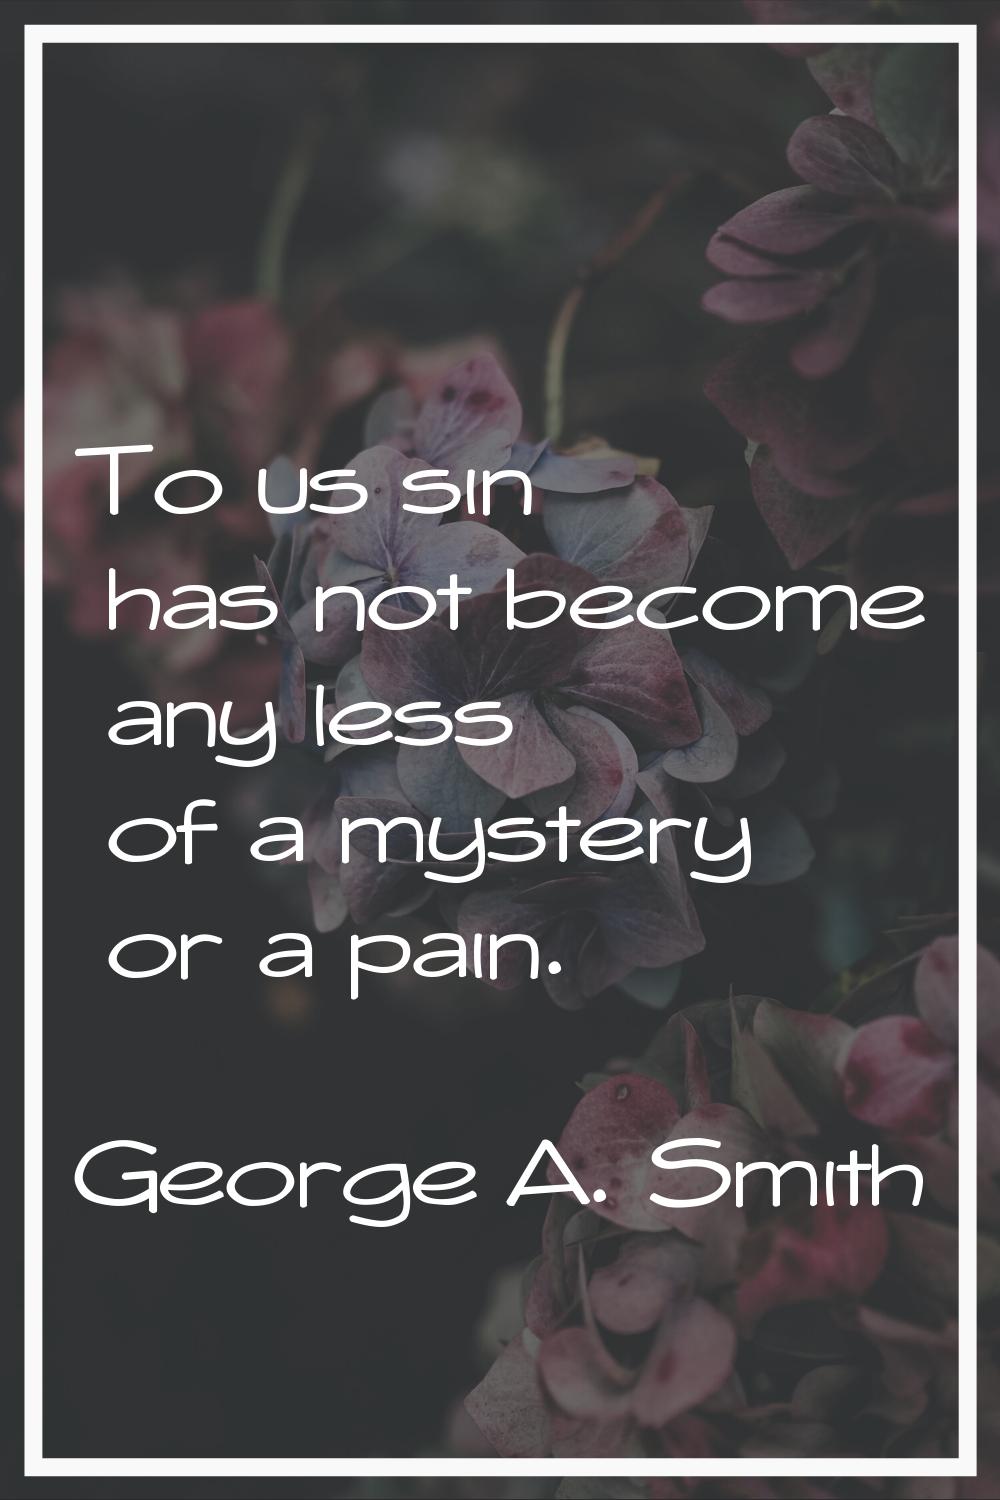 To us sin has not become any less of a mystery or a pain.